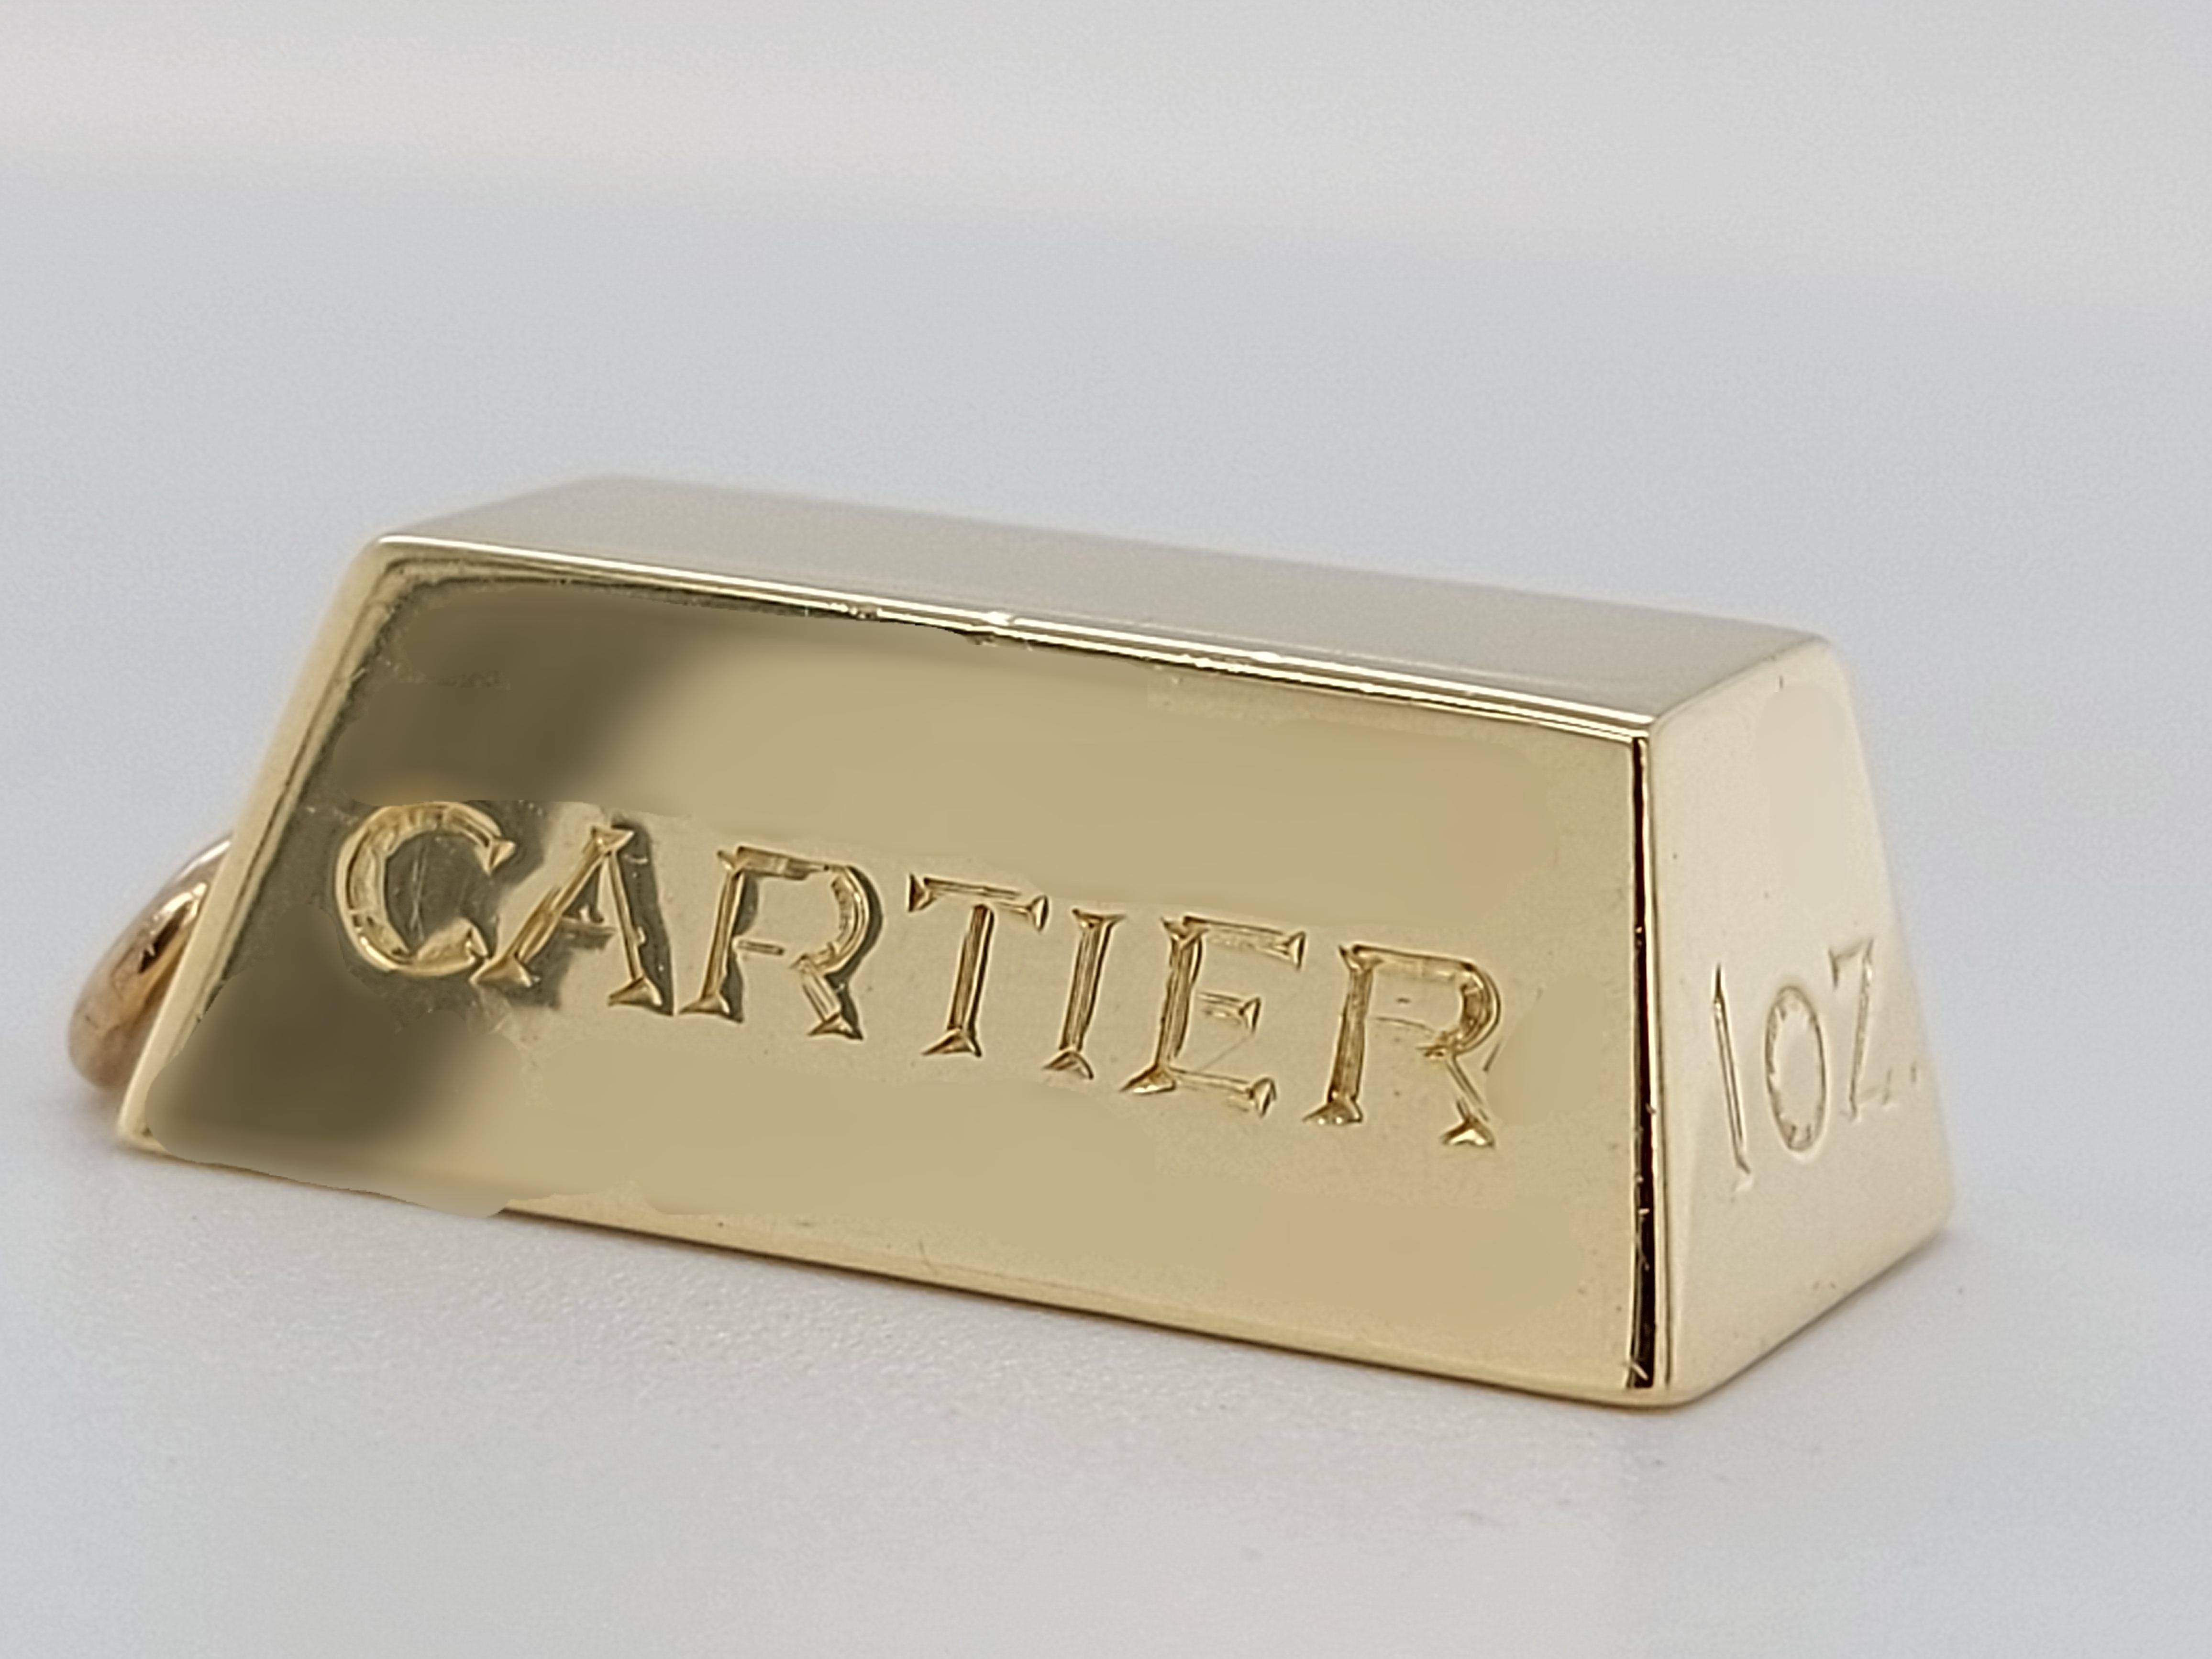 Cartier 1 oz Ingot Brick Bar Solid 18k Yellow Gold Charm or Pendant from 70 s

This authentic vintage Cartier pendant is finely crafted from solid 18k yellow gold. It features the classic solid gold ingot bar pendant or charm, it is inscribed with